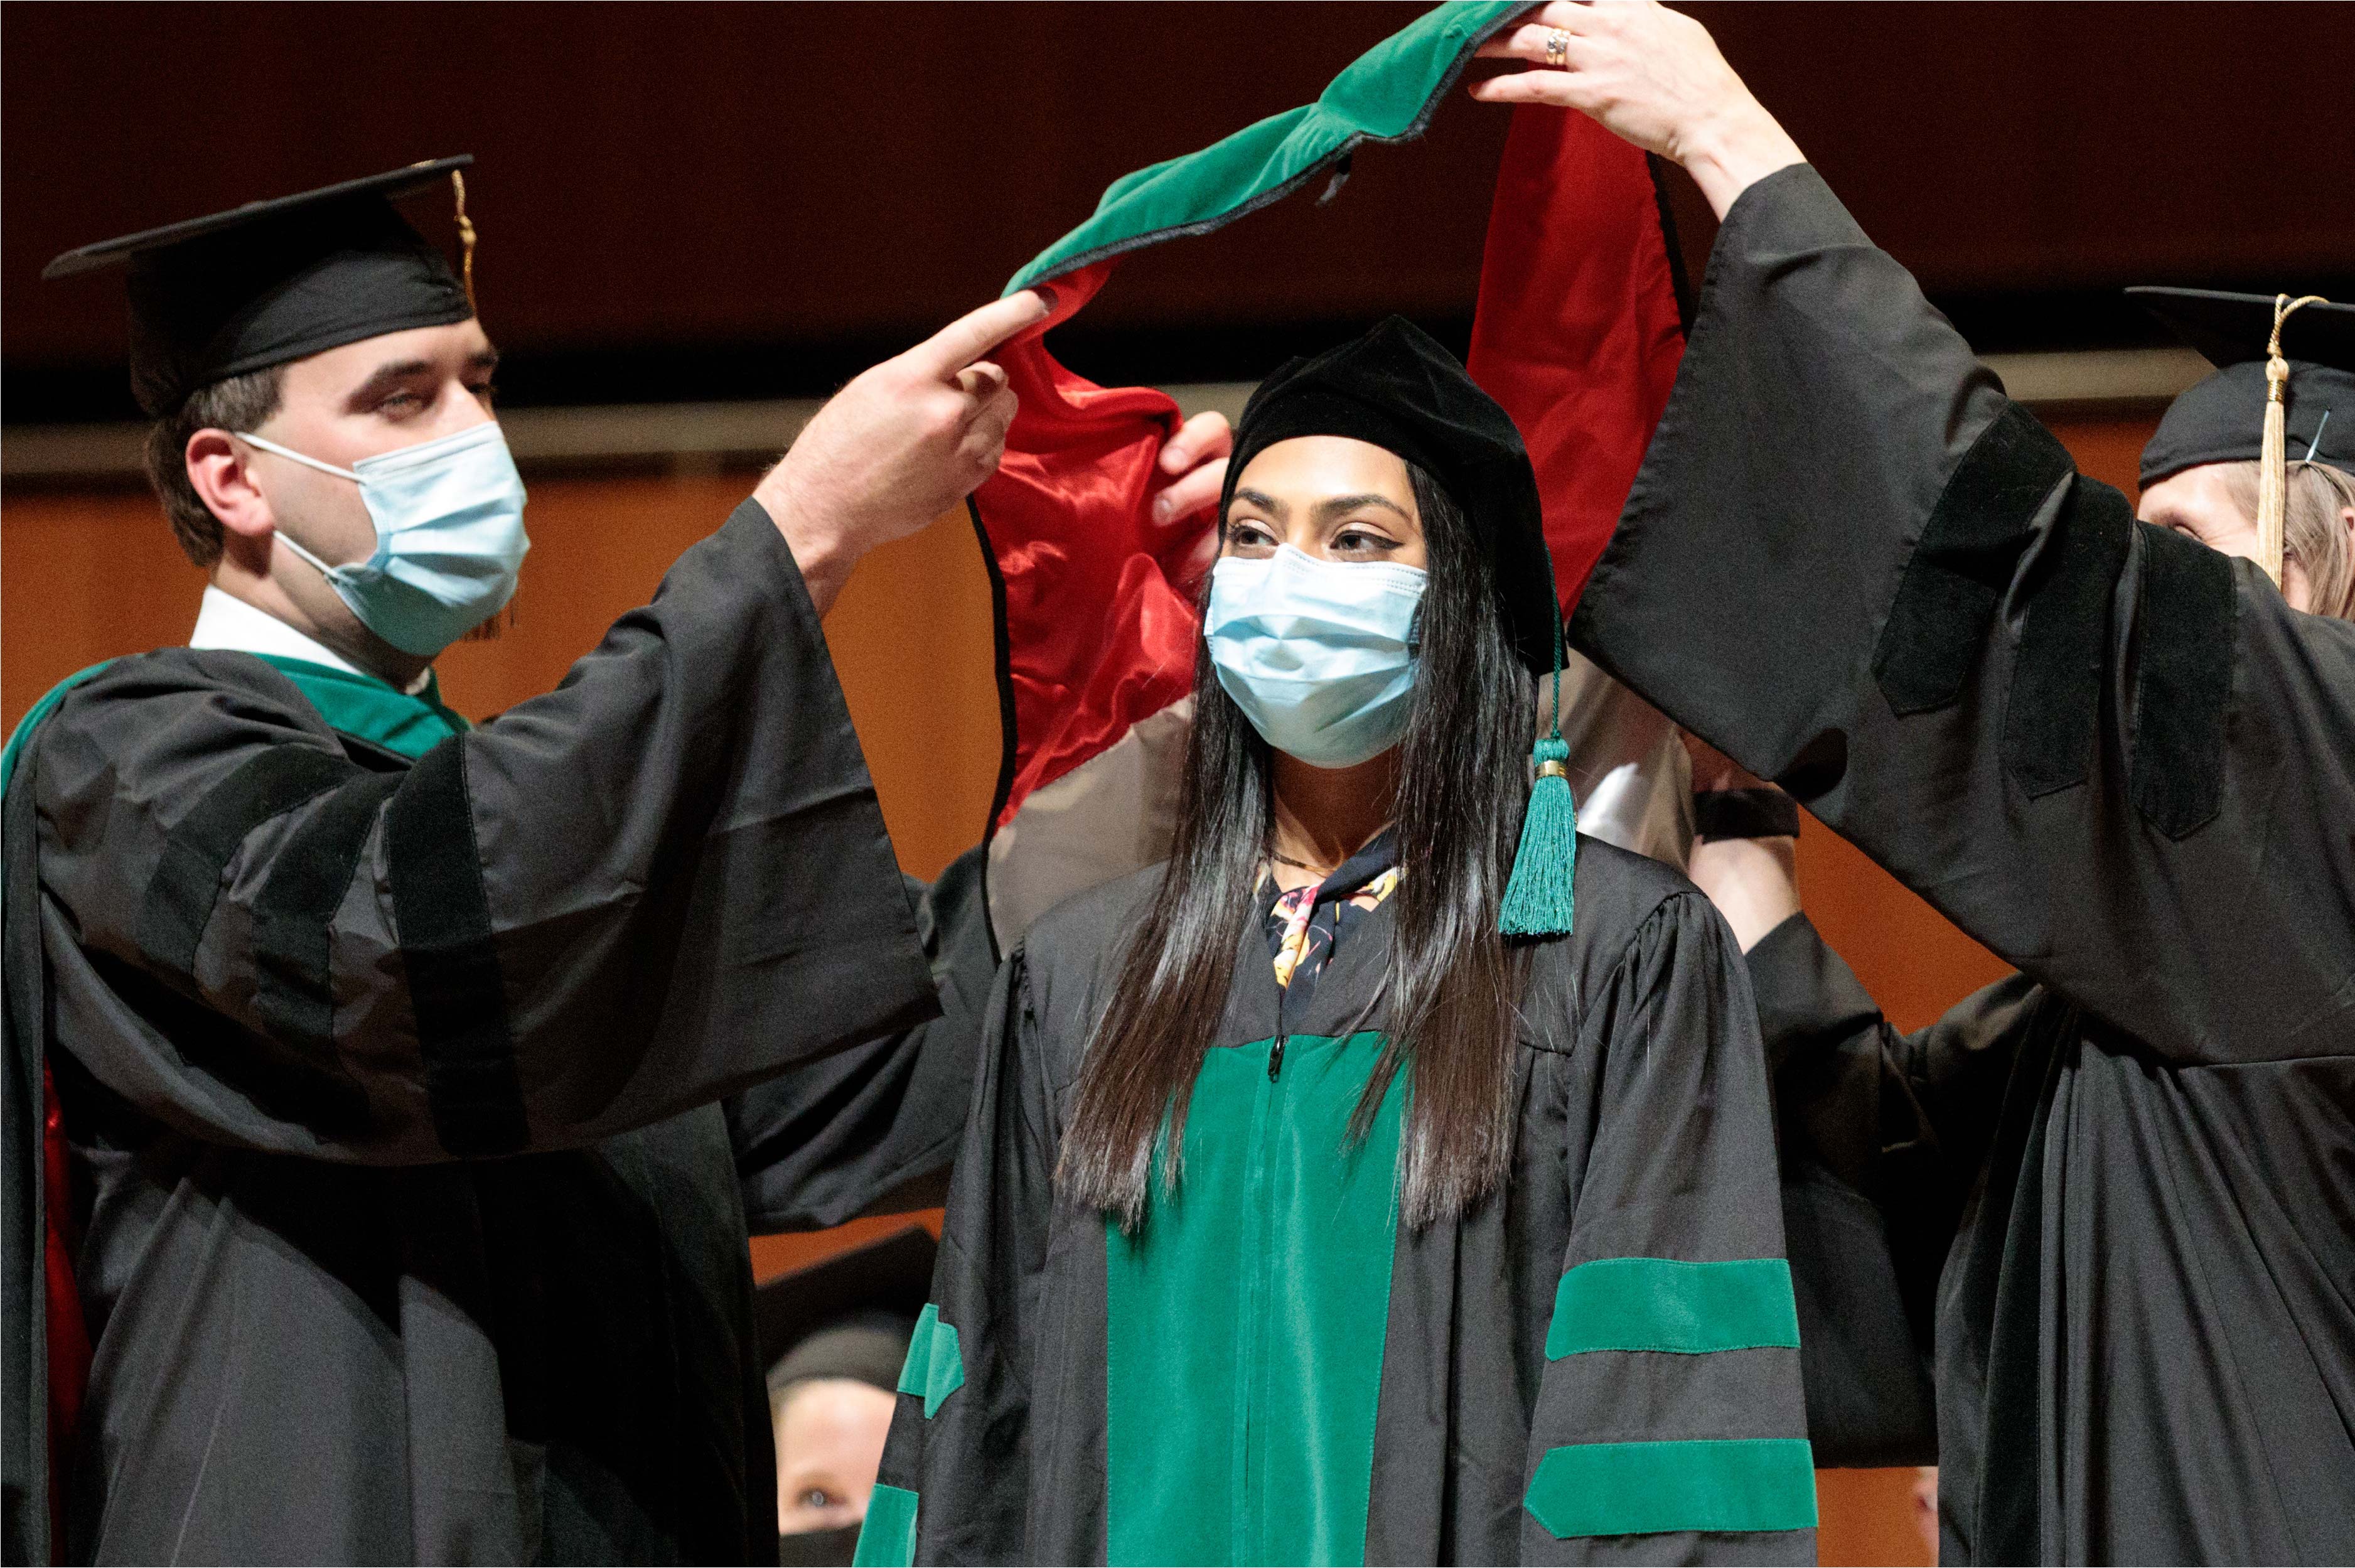 A student wearing graduation robes participates in a hooding ceremony